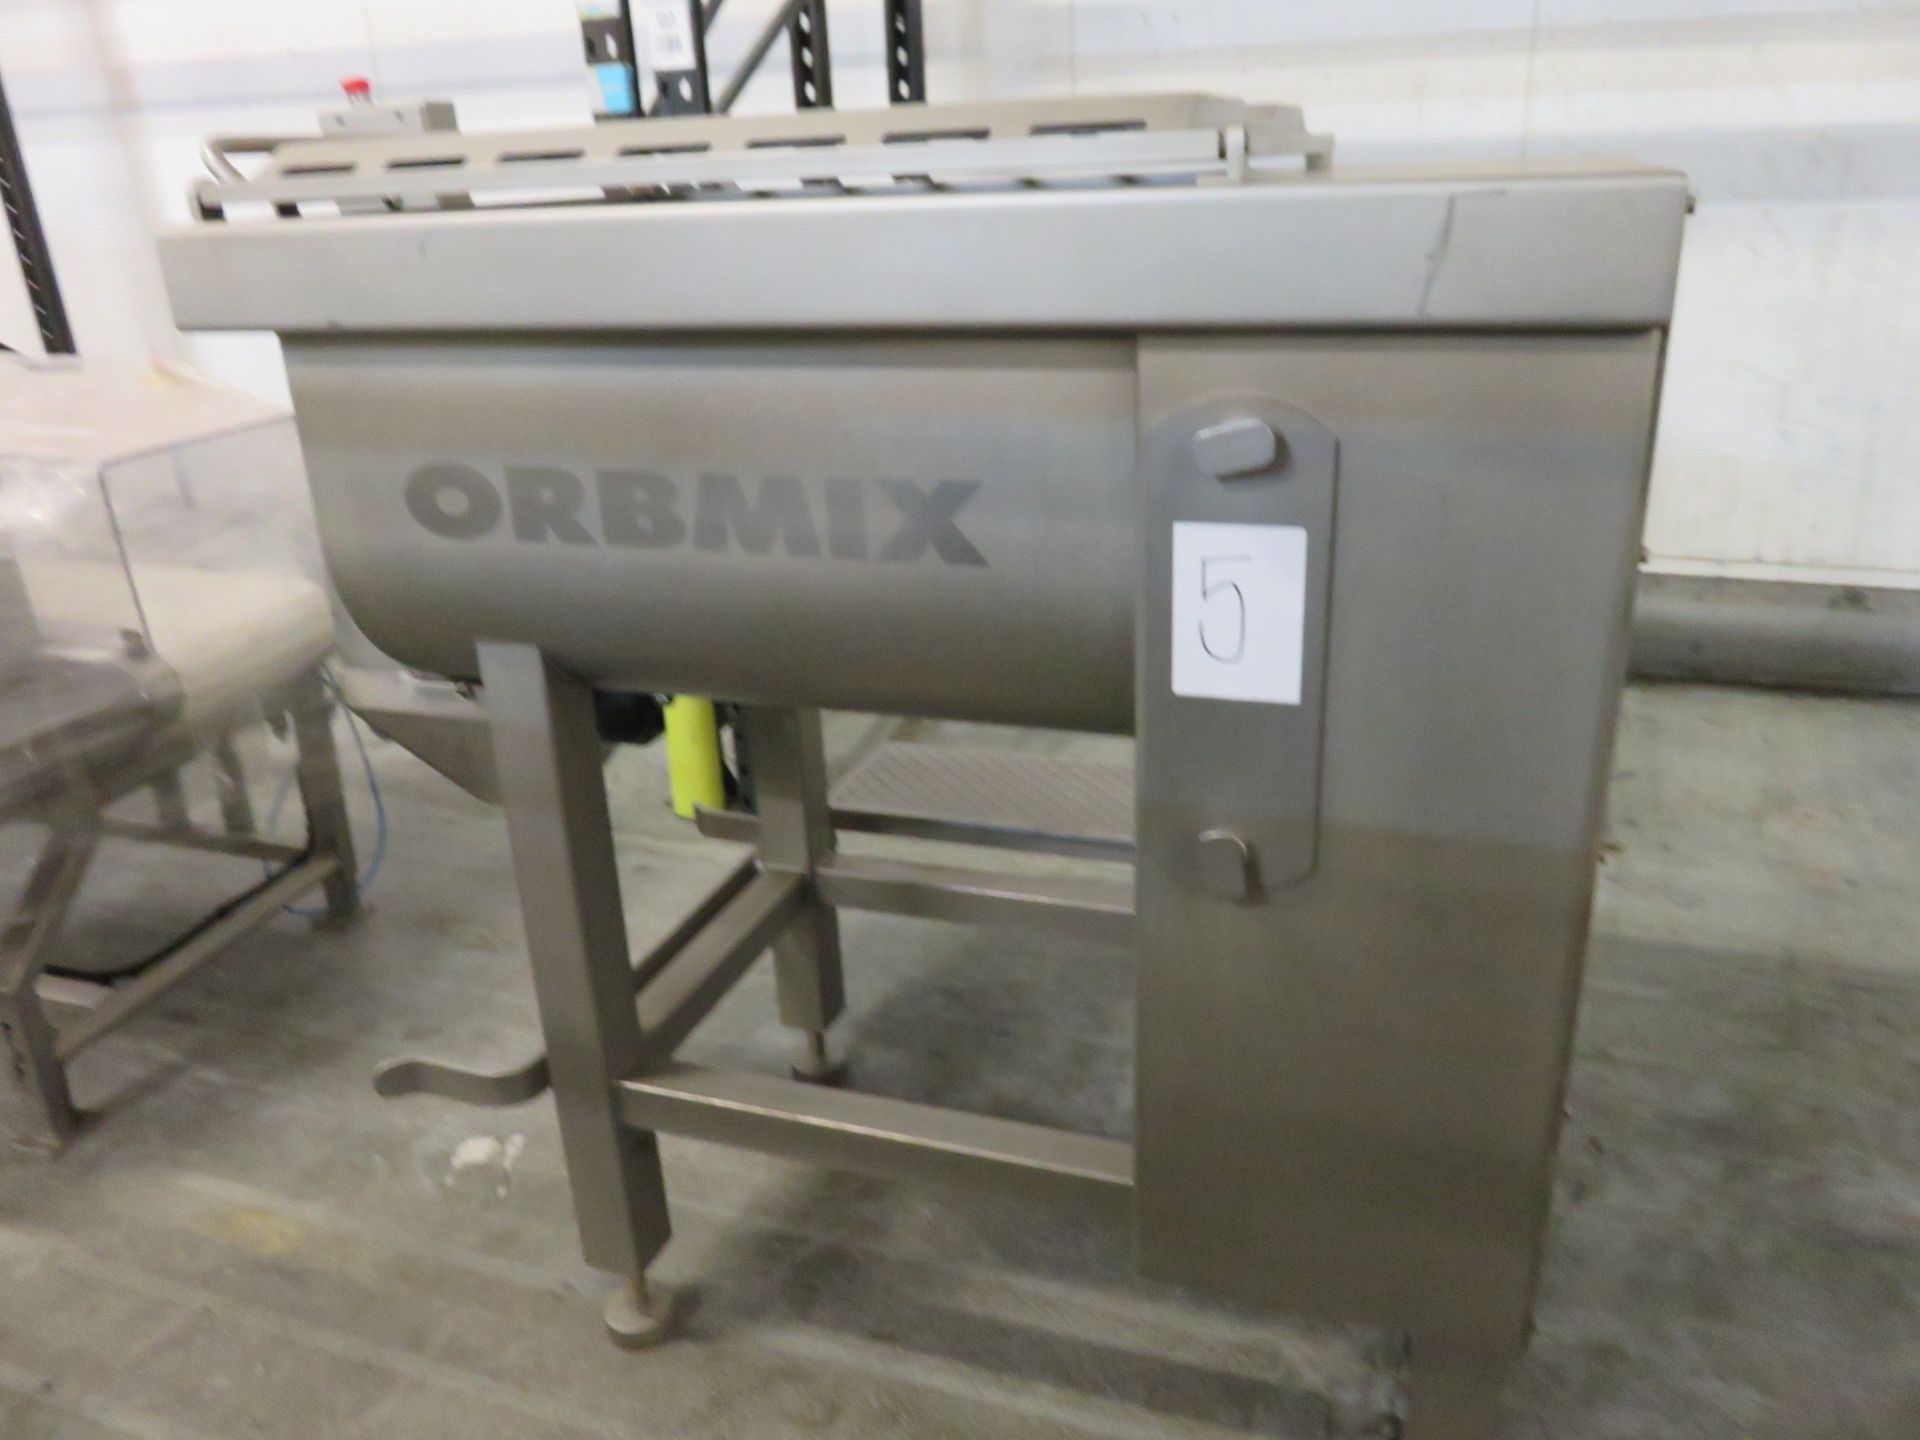 Orbmix S/s Paddle Mixer. Type MX300. Forward & reverse. 2 speed. LIFT OUT £50